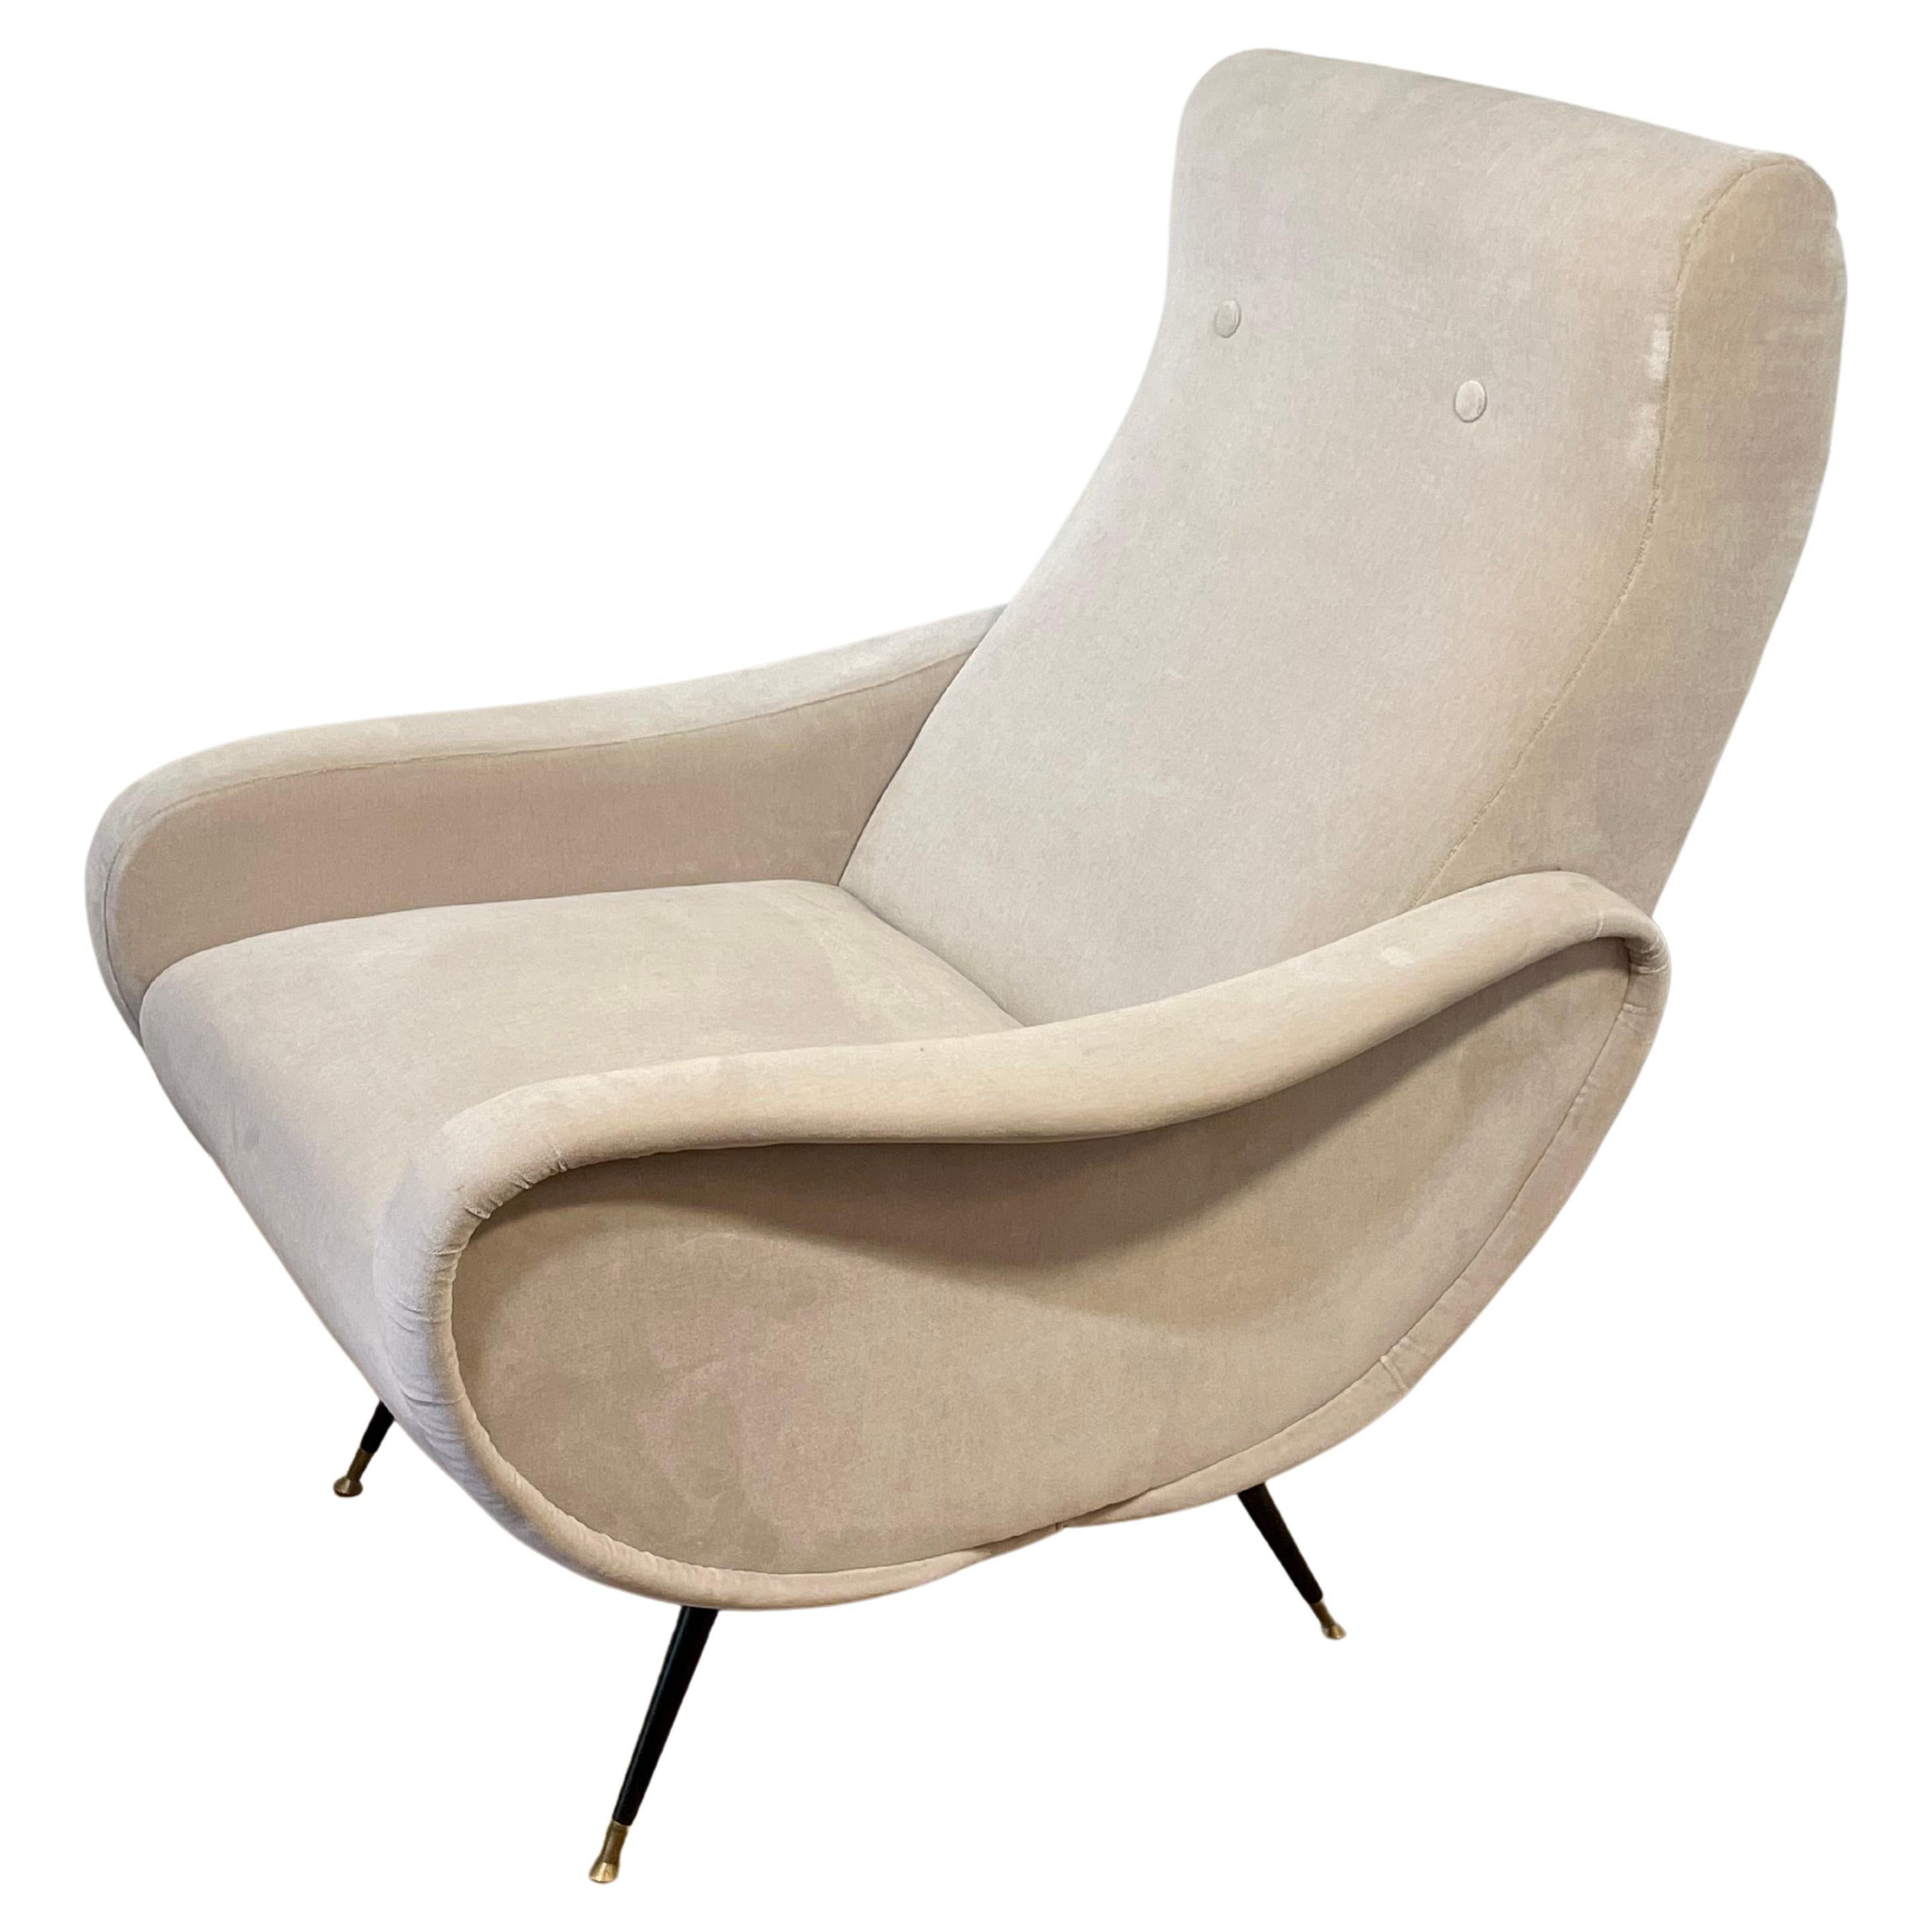 Vintage Marco Zanuso Lady Chair
Tufted and upholstered in Bianco Verona performance velvet by Martyn Lawrence Bullard
Fitted with brass feet and steel legs
In stock as pictured and made to order
COM and COL upholstery availible